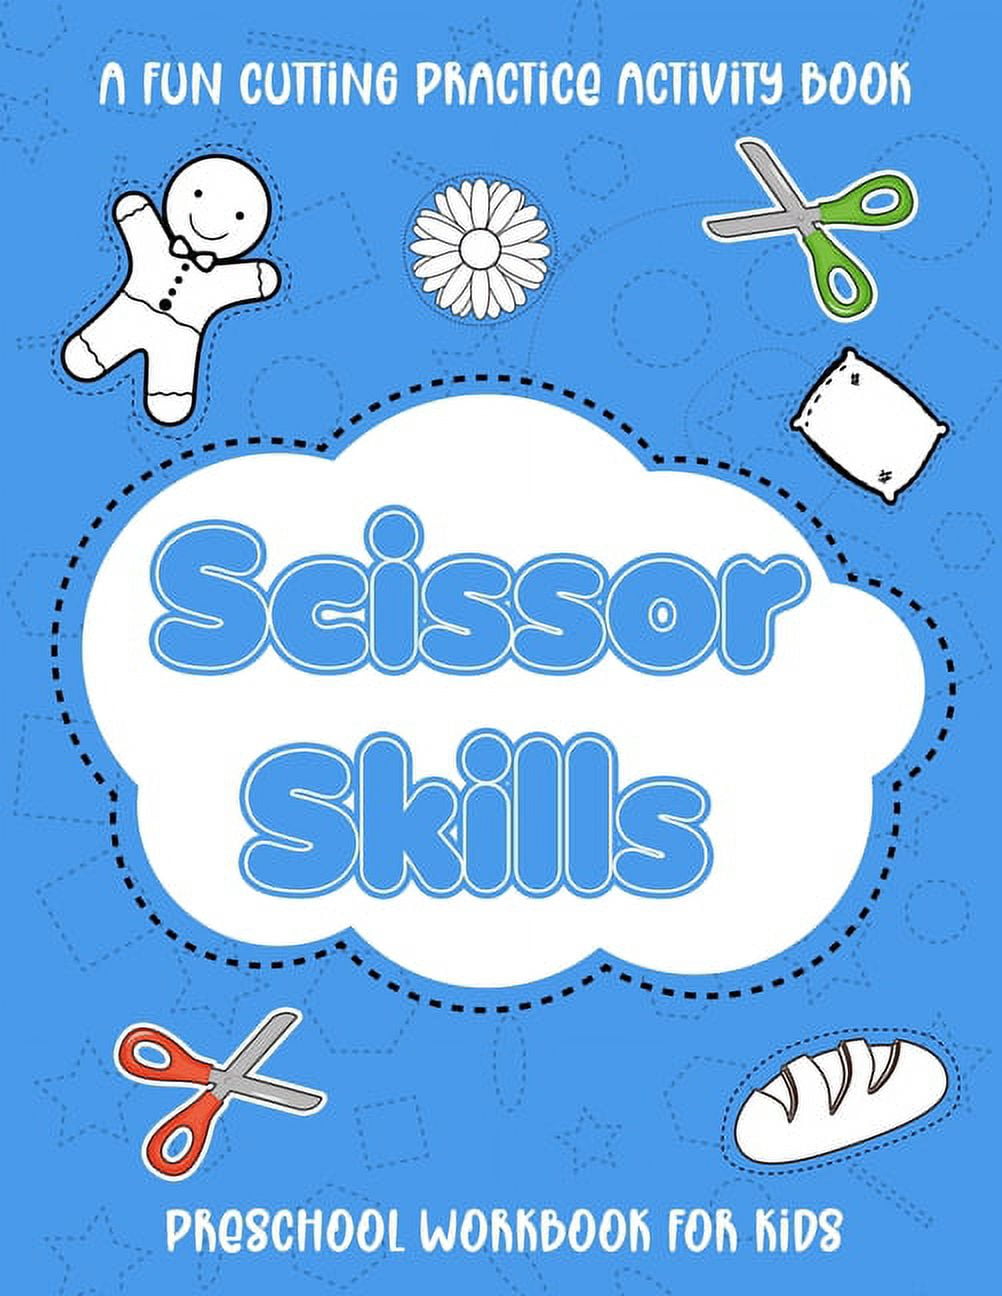 Scissor Skills Preschool Workbook for Kids: A Fun Cutting Practice Activity Book for Toddlers and Kids Ages 3-5: Scissor Practice for Preschool. 40 Pages of Fun Animals, Shapes, Vahicles, Food and Patterns [Book]